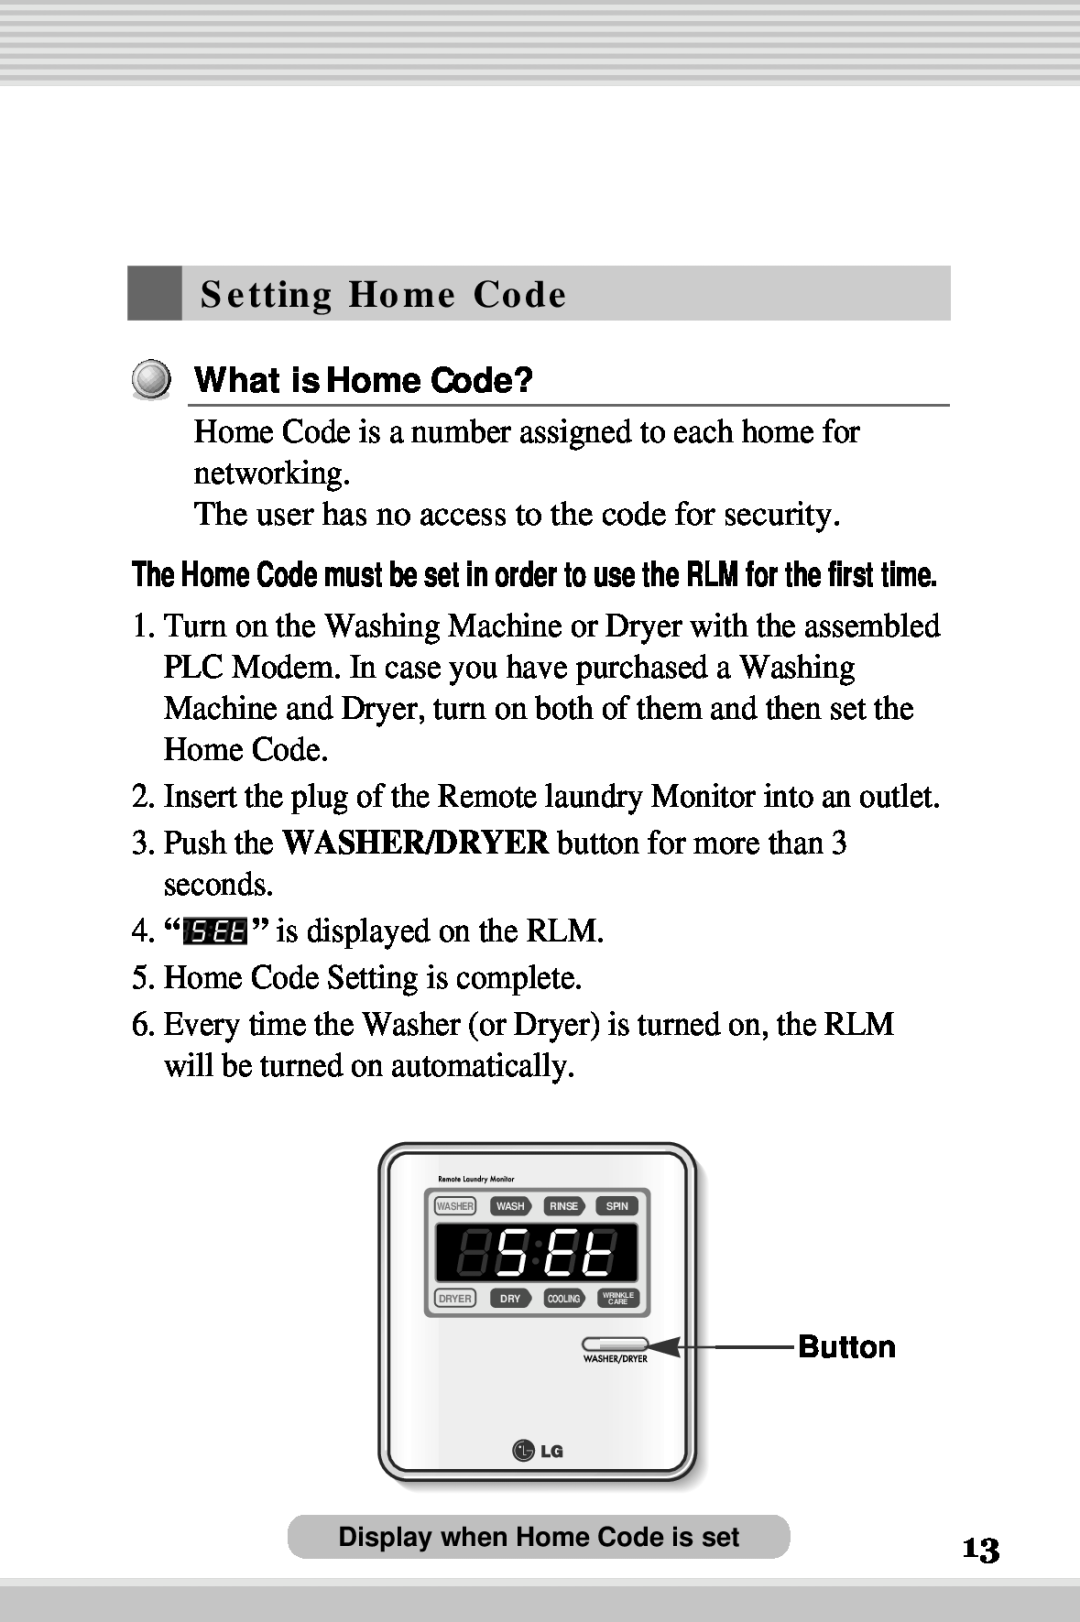 LG Electronics RLM10 Setting Home Code, The user has no access to the code for security, Washer/Dryer, 4. “, Button 